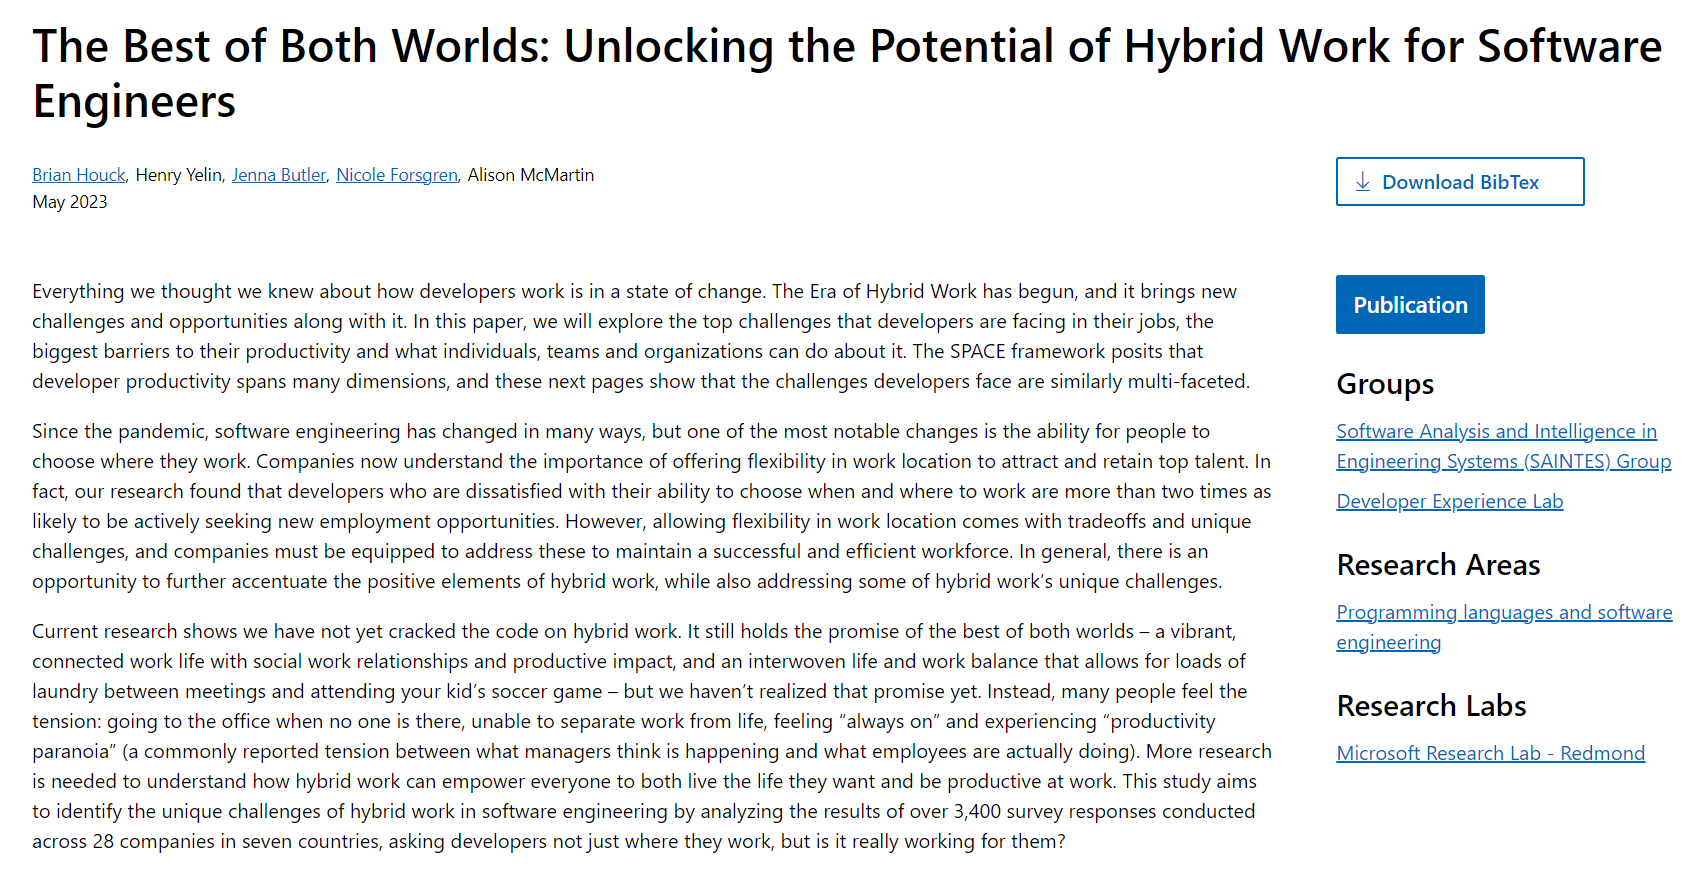 The Best of Both Worlds: Unlocking the Potential of Hybrid Work for Software Engineers